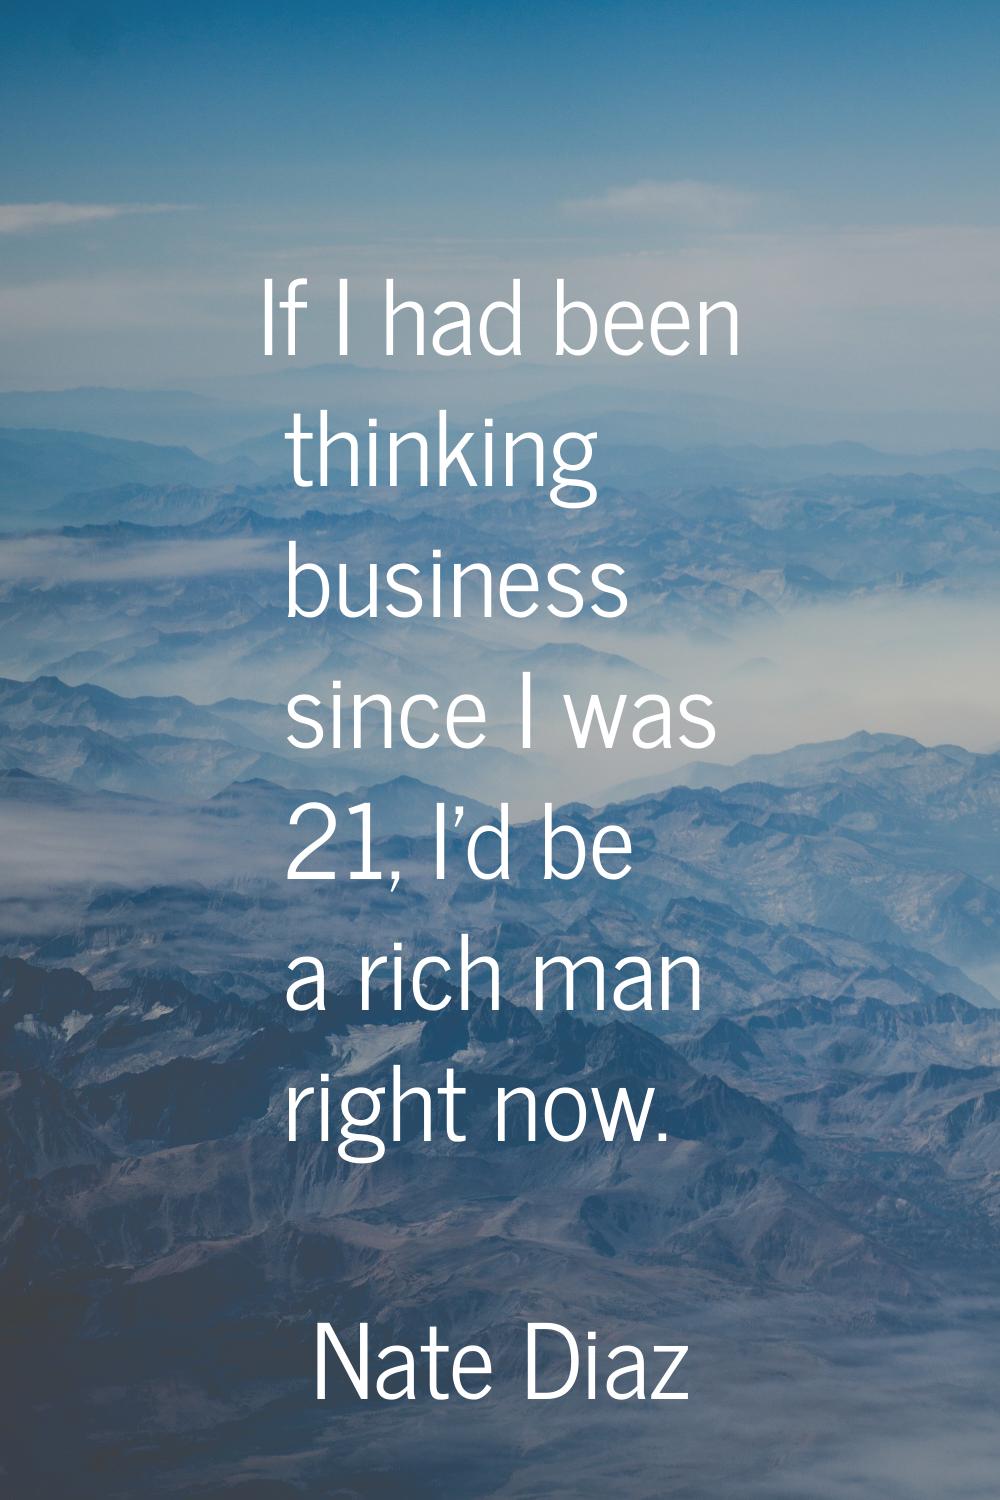 If I had been thinking business since I was 21, I'd be a rich man right now.